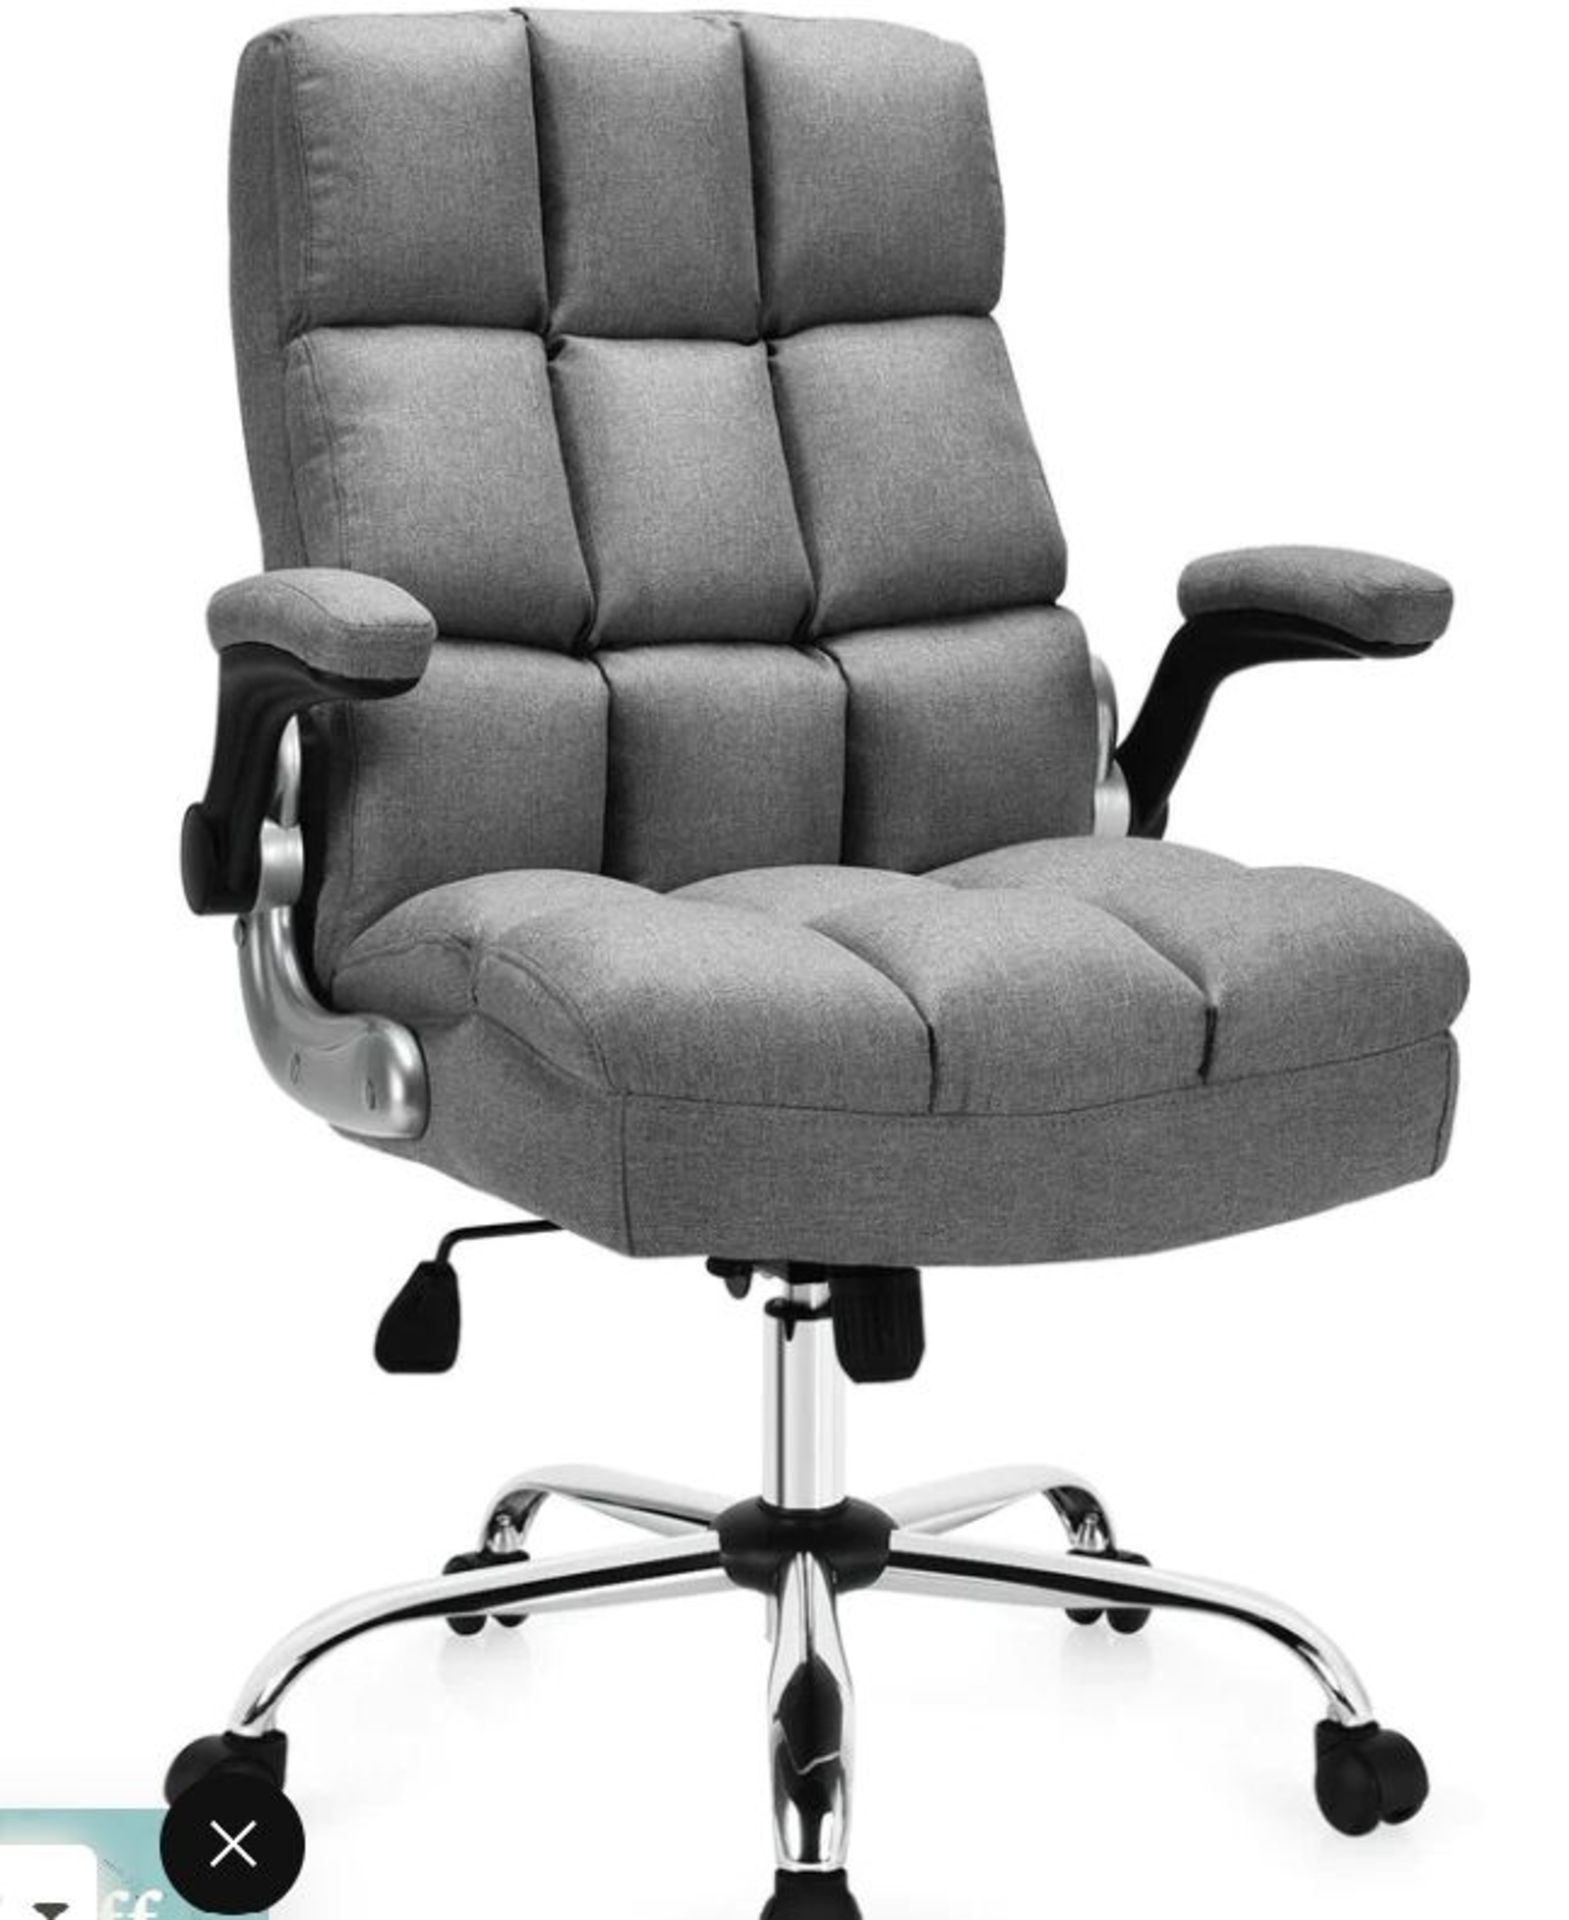 Giantex Executive Office Chair,Adjustable Tilt Angle and Flip-up. - ER24. Ideal for working, reading